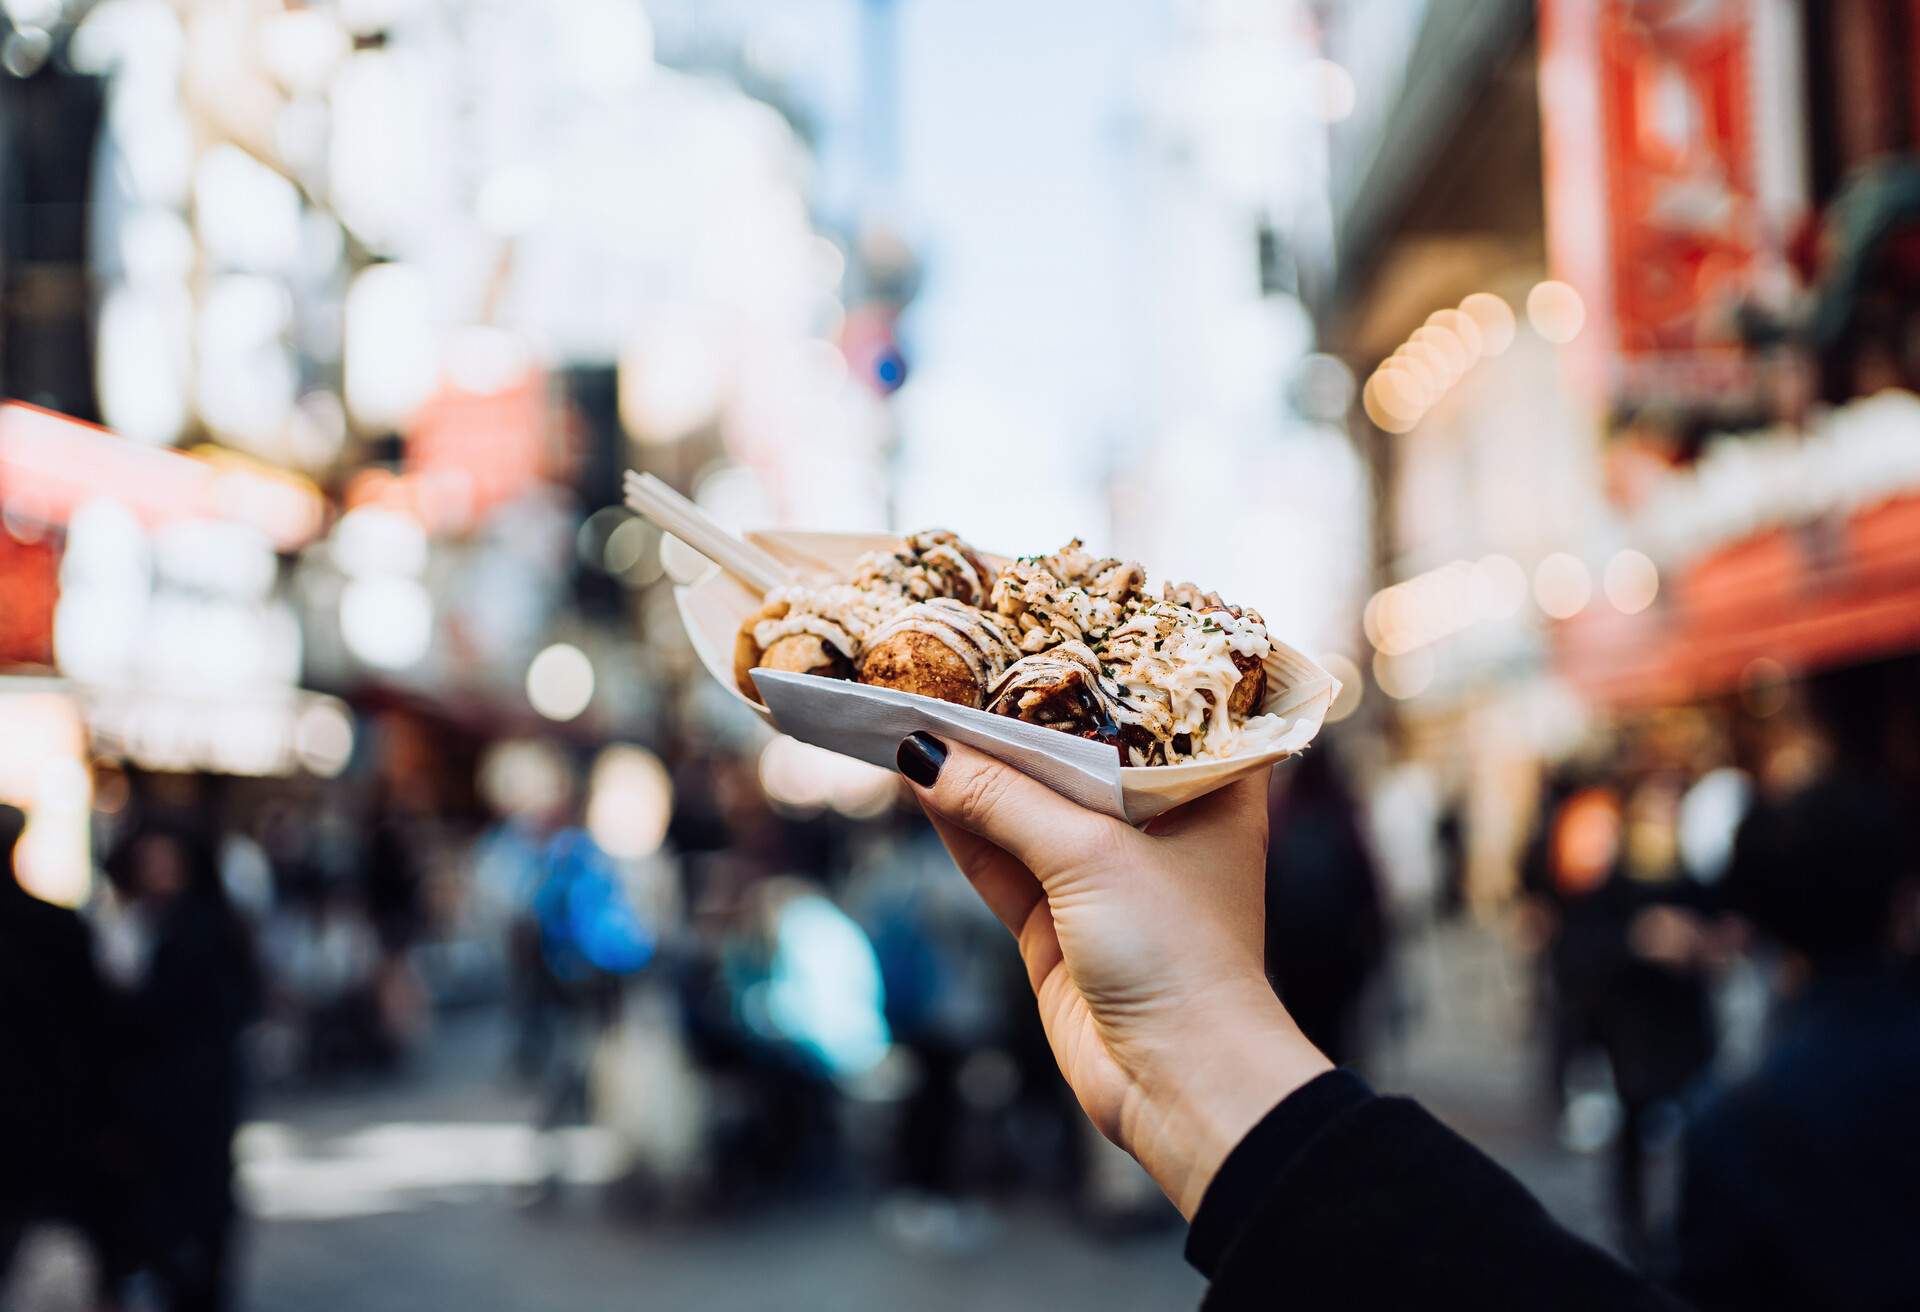 Personal perspective of a female traveller holding freshly made traditional Japanese street-style snack takoyaki (octopus balls) against downtown city street while visiting Osaka